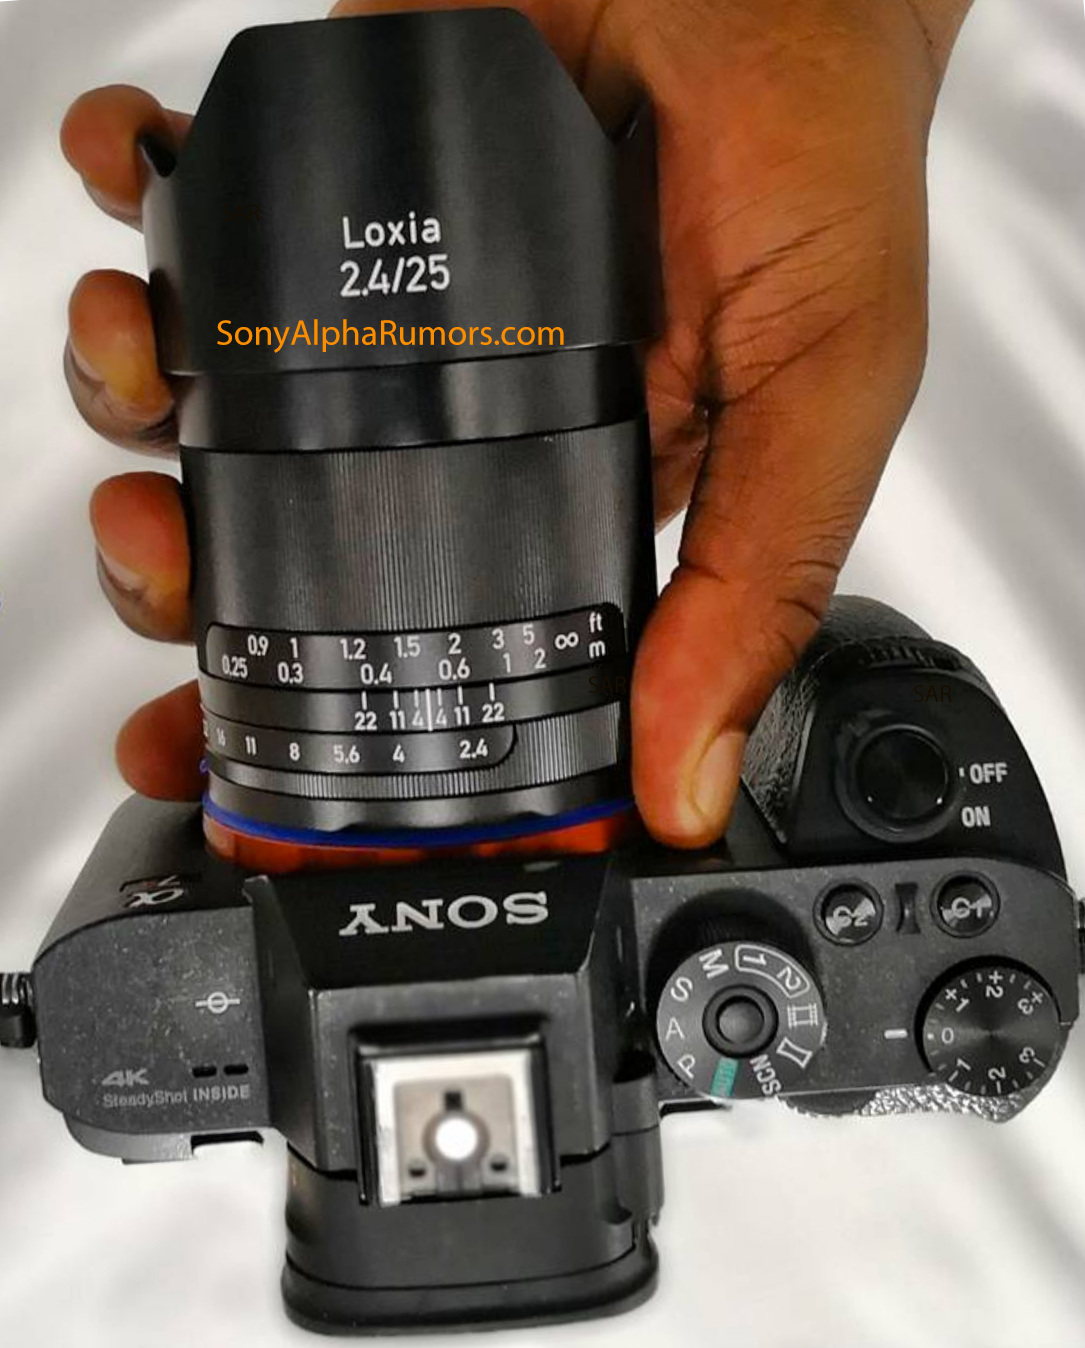 SR5) First leaked image of the new Zeiss Loxia 25mm f/2.4 FE lens